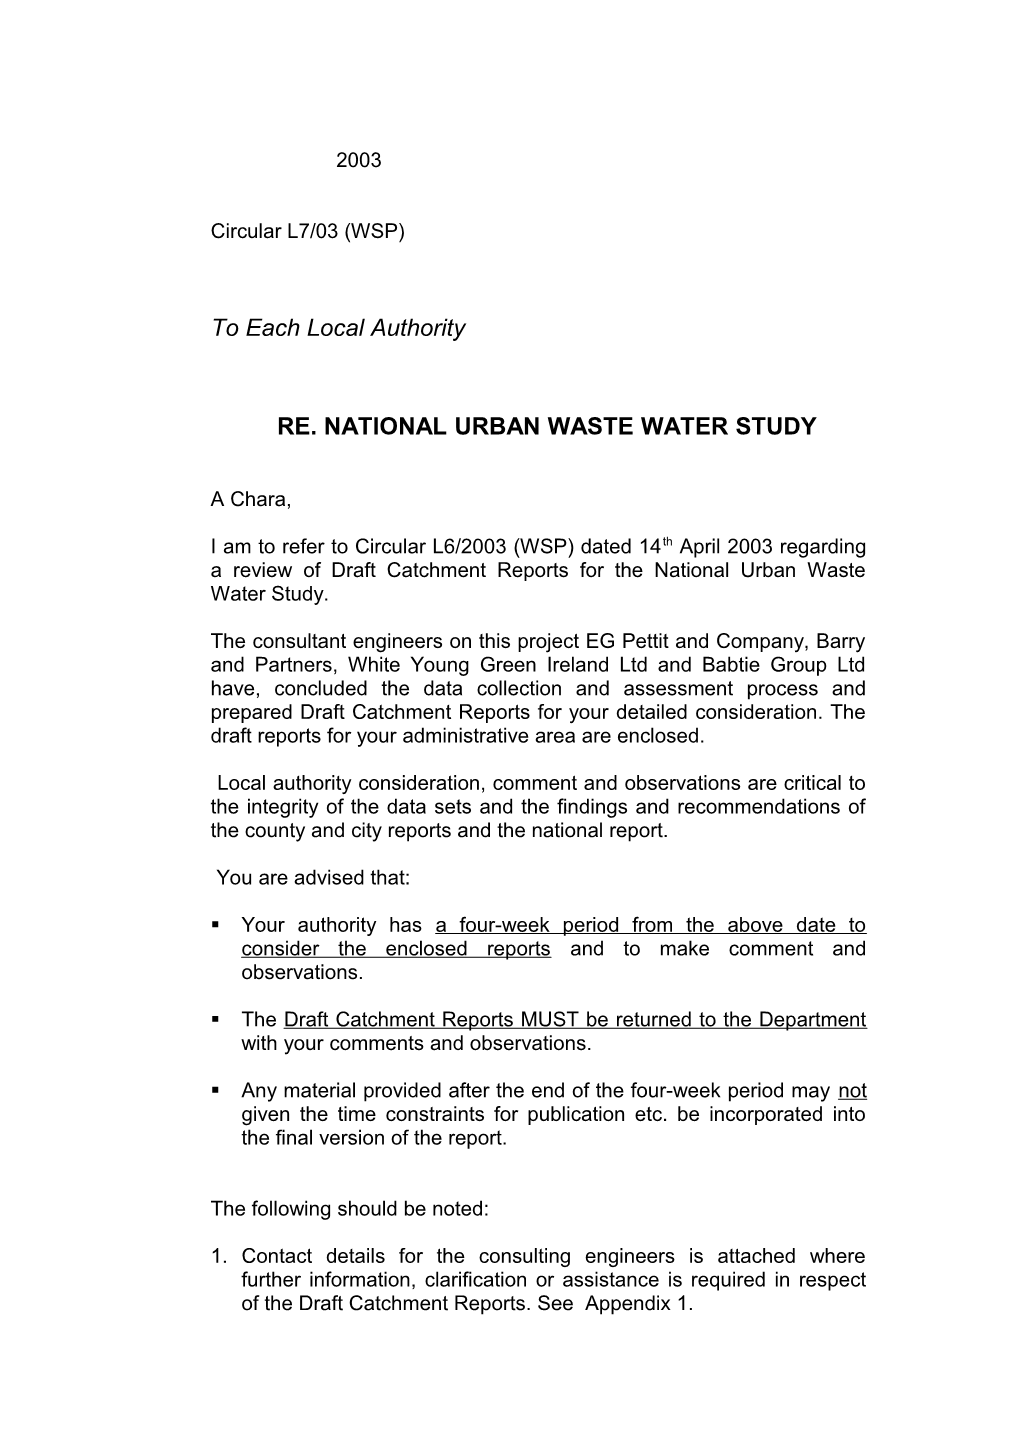 Re. National Urban Waste Water Study